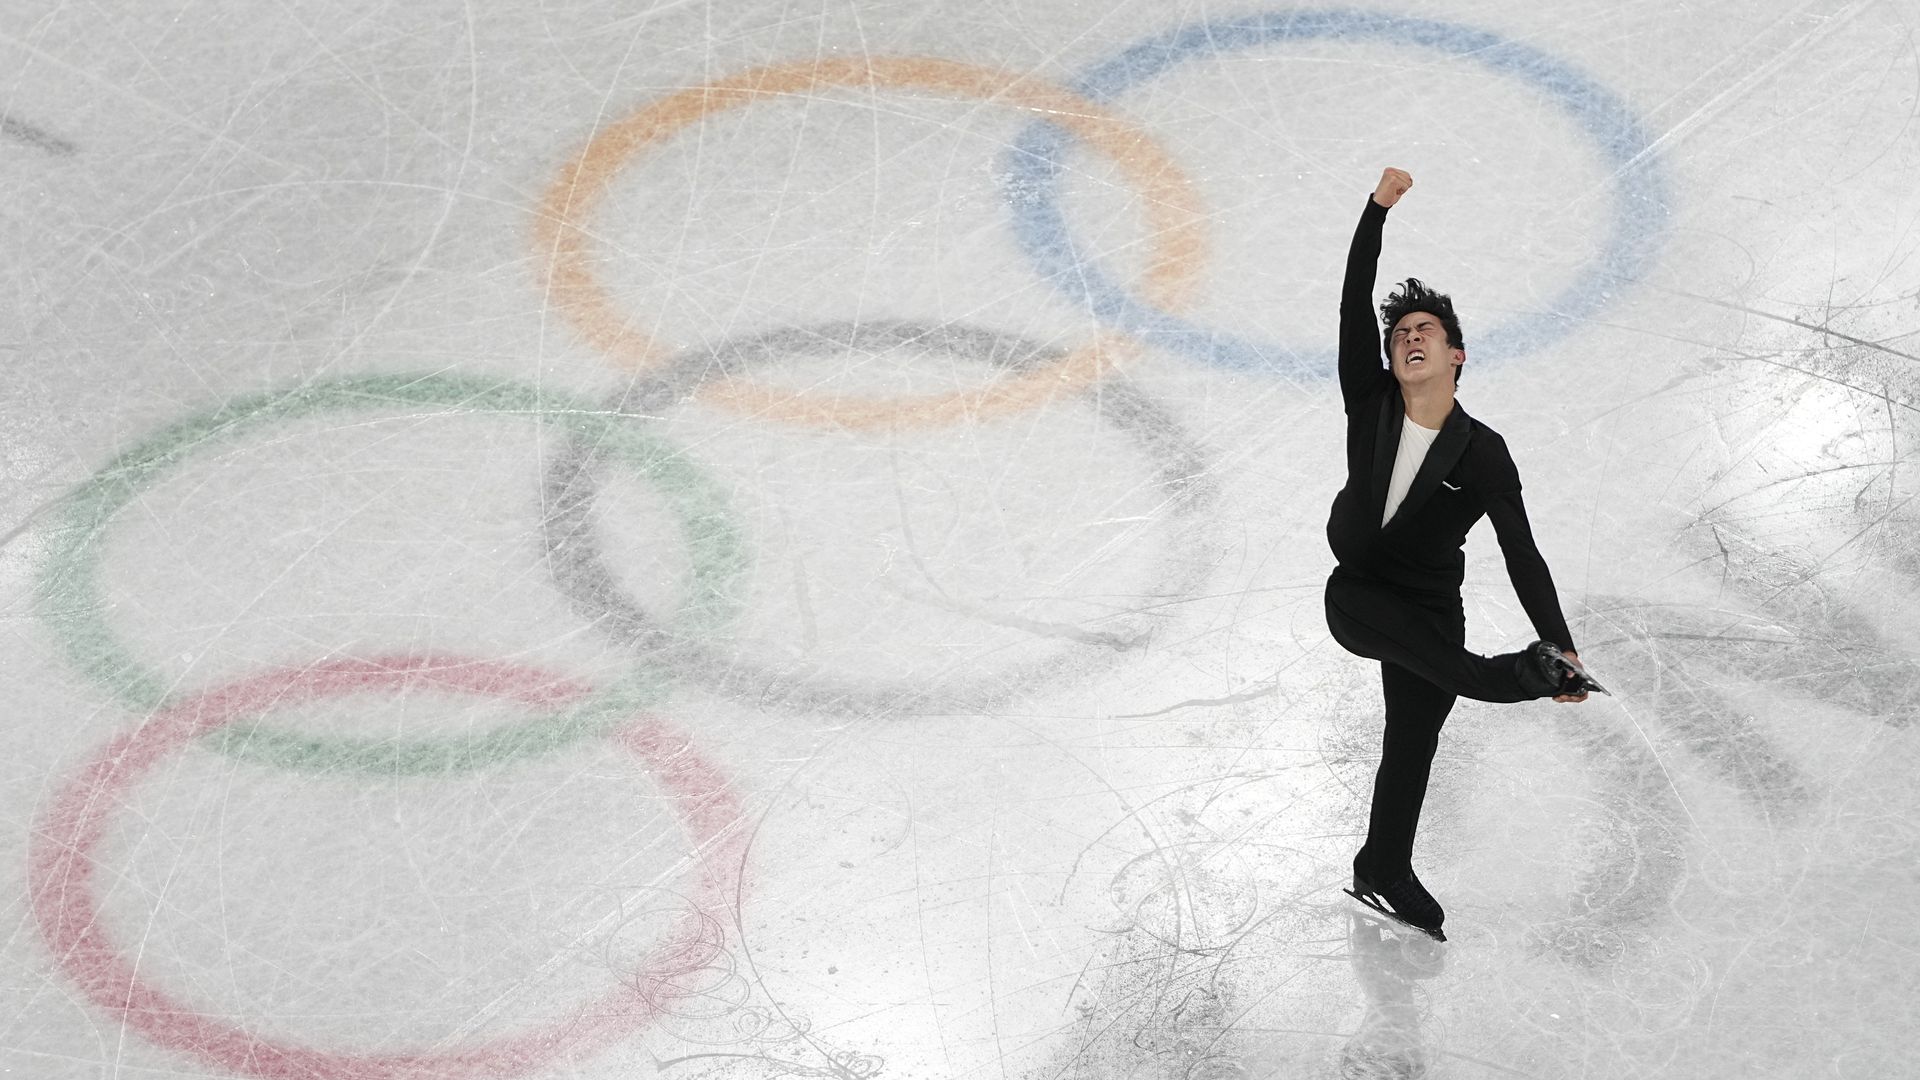 Nathan Chen, of the United States, competes during the men's short program figure skating competition at the 2022 Winter Olympics, Tuesday, Feb. 8.